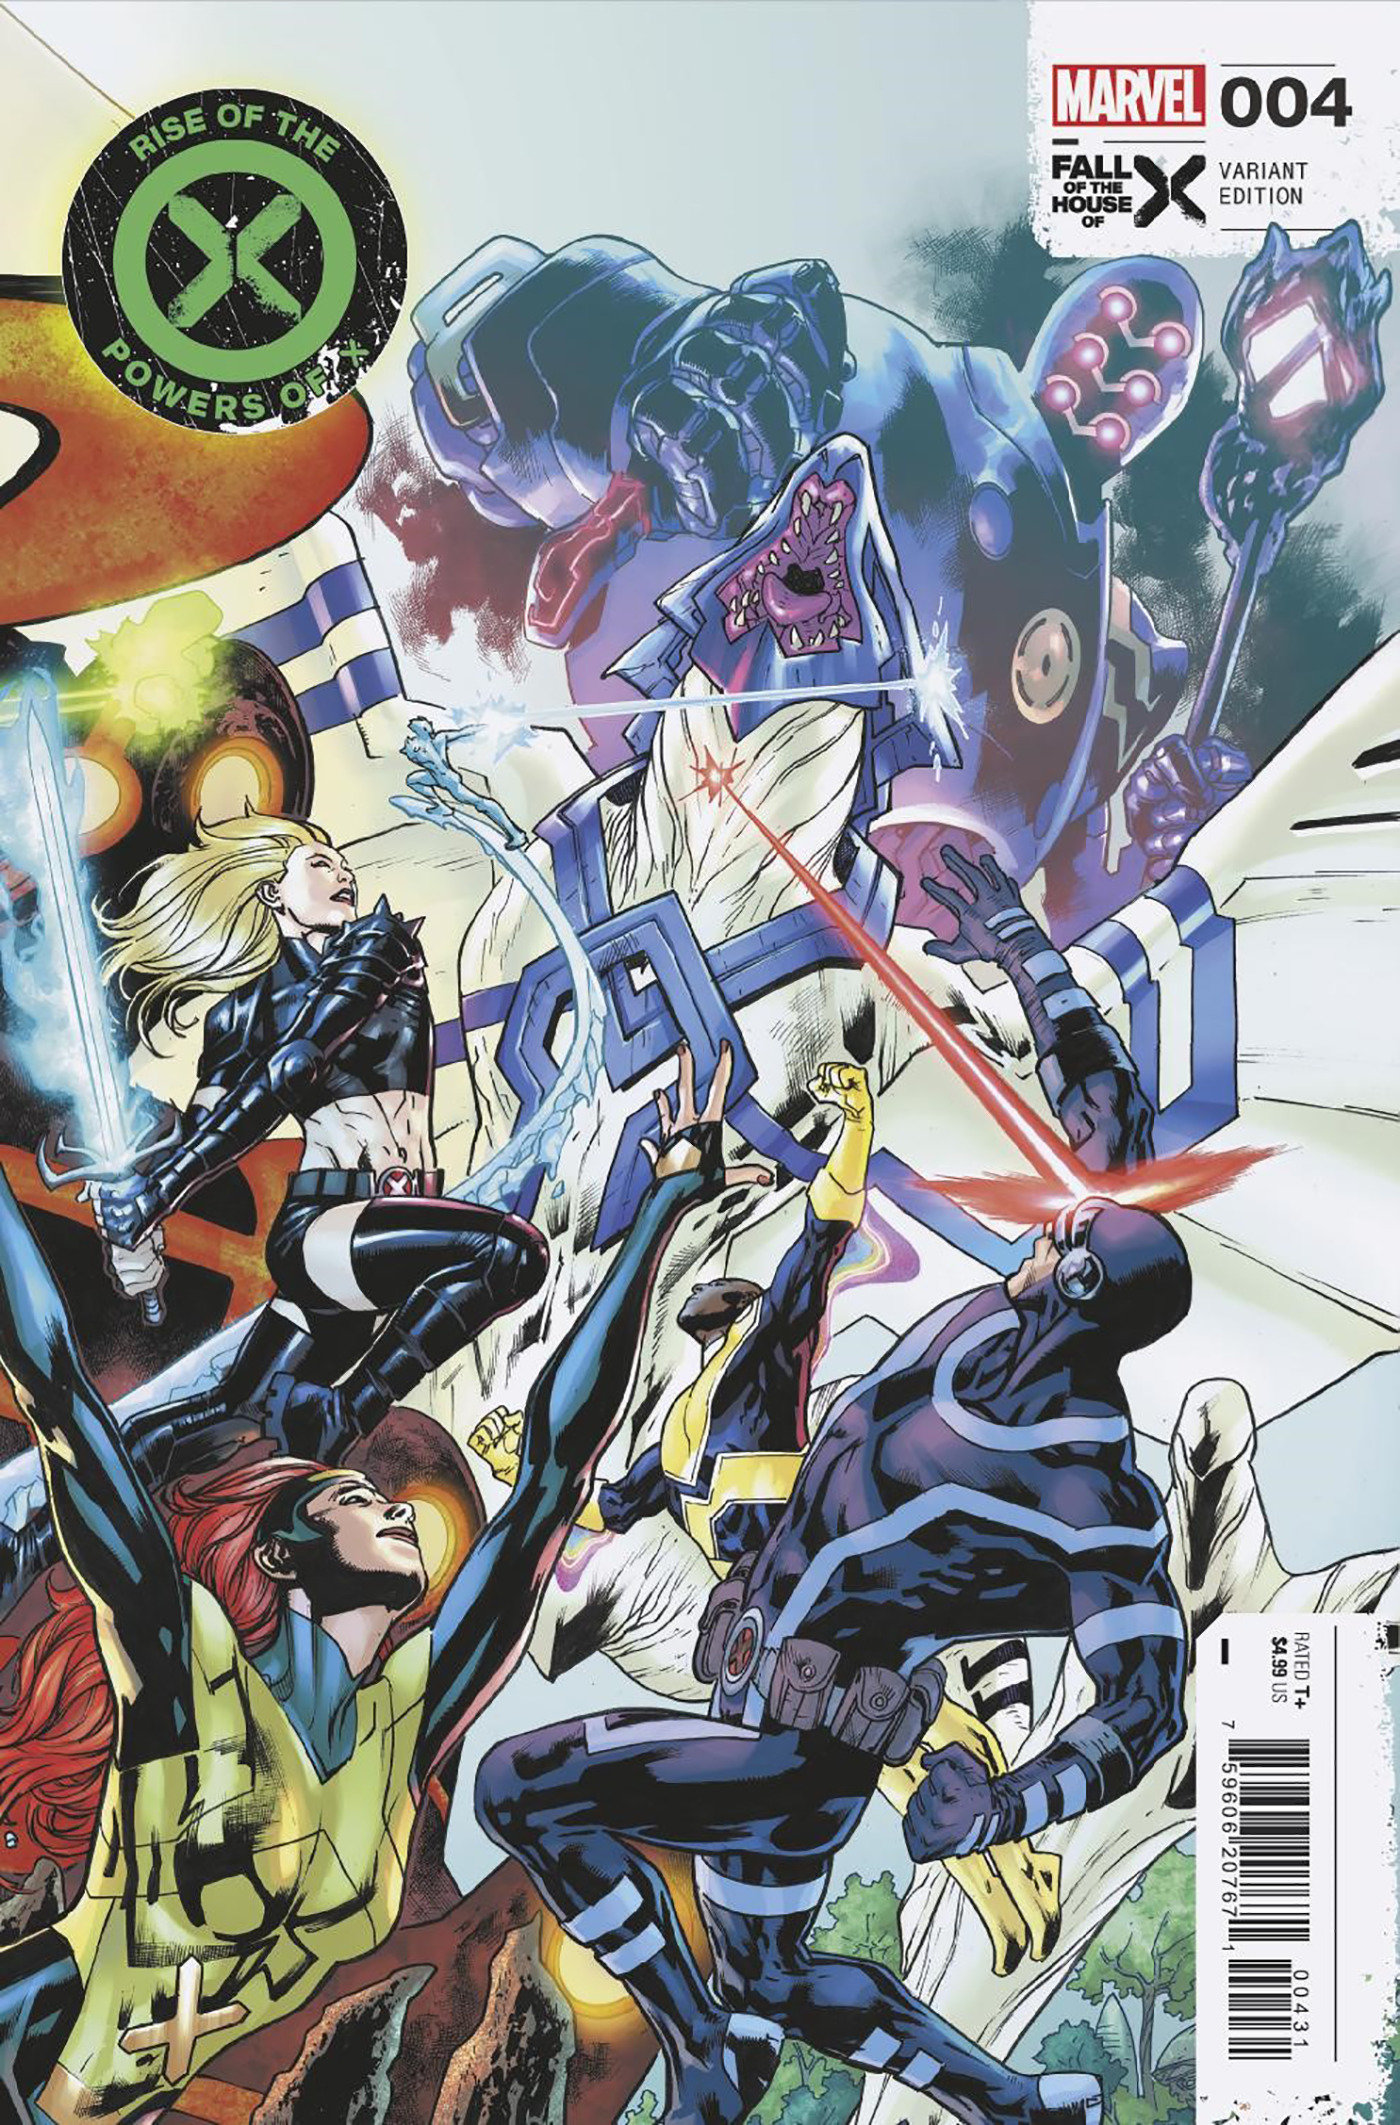 Rise of the Powers of X #4 Bryan Hitch Connecting Variant (Fall of the House of X)